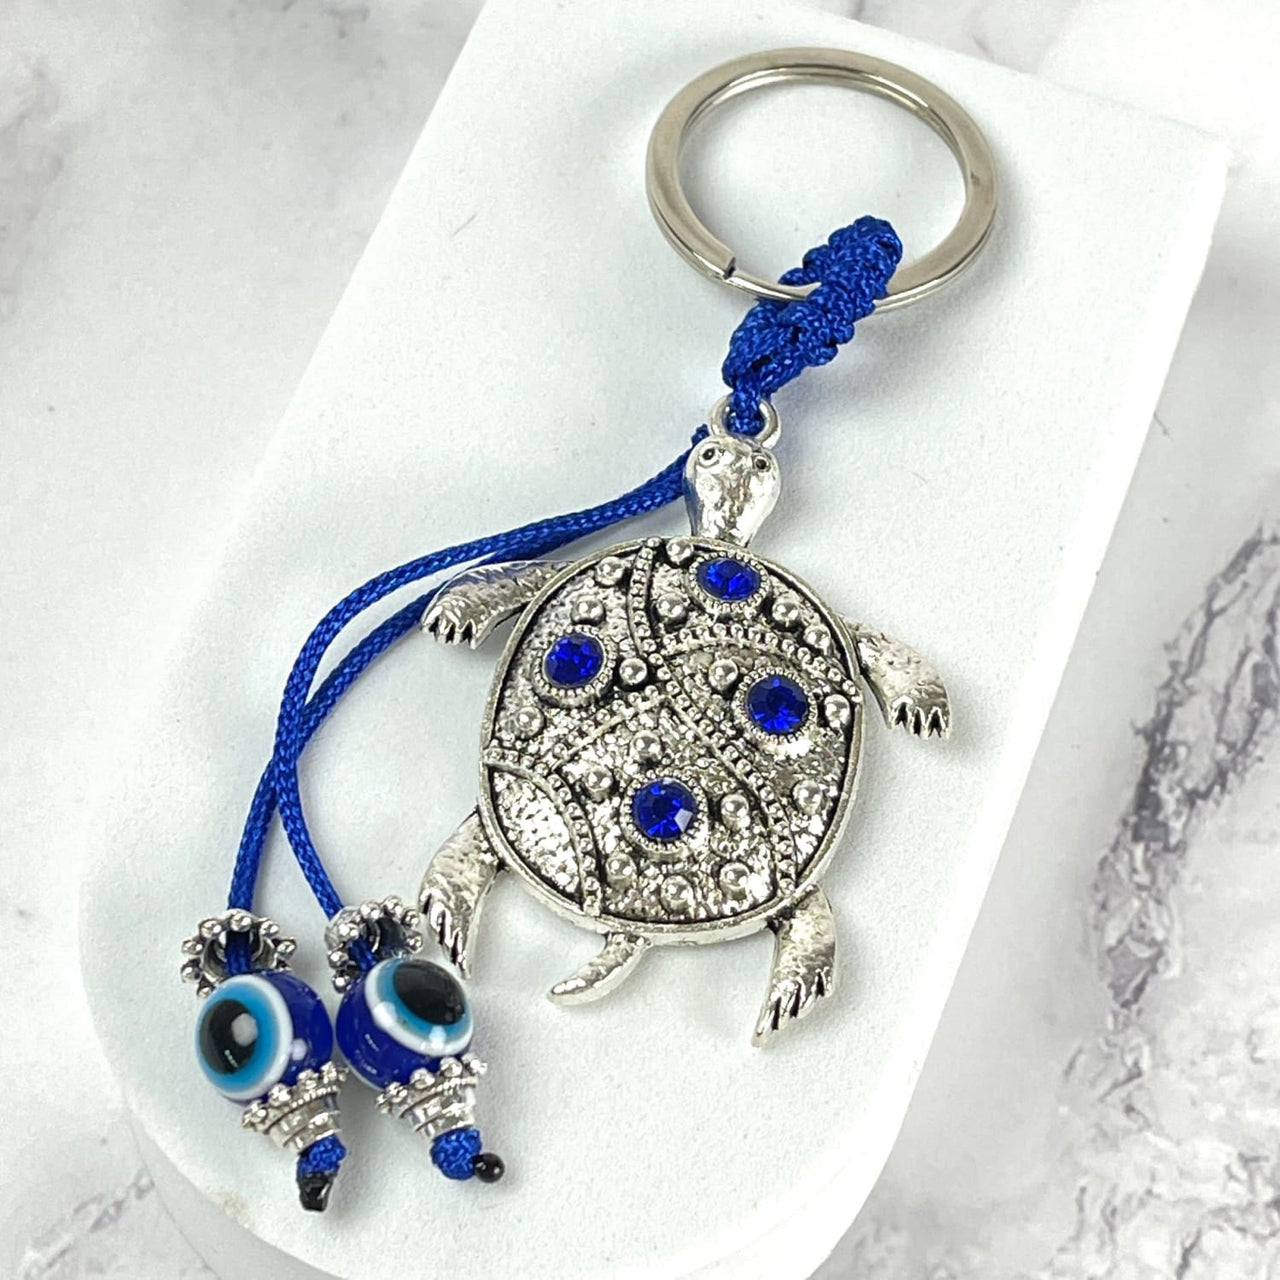 Evil Eye Keychain with Turtle and Blue Bead - Protect and Adorn with #Q198 Ornament